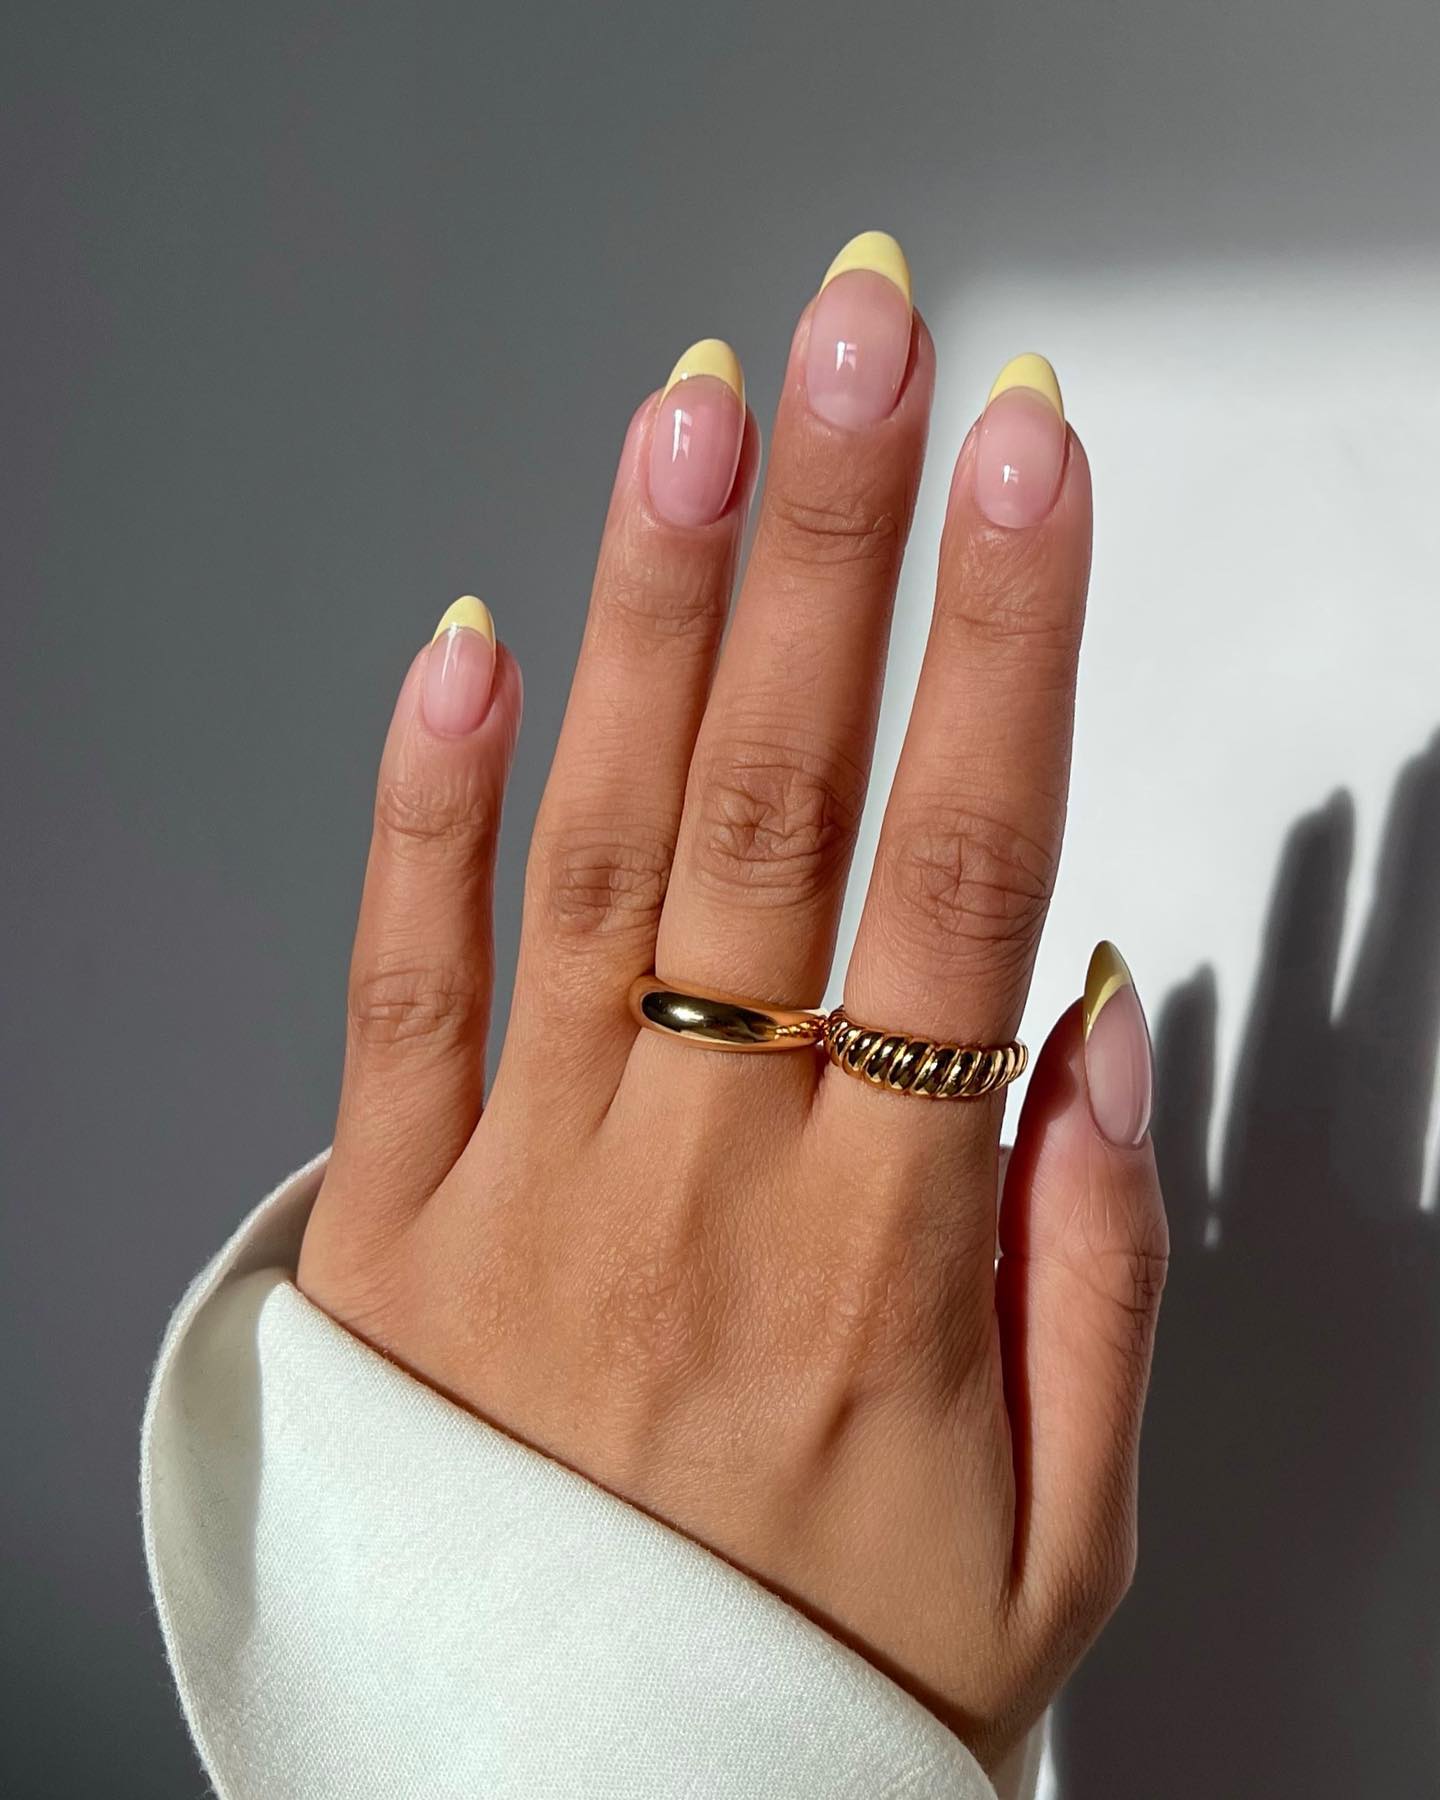 Oval nails with pastel yellow French tips